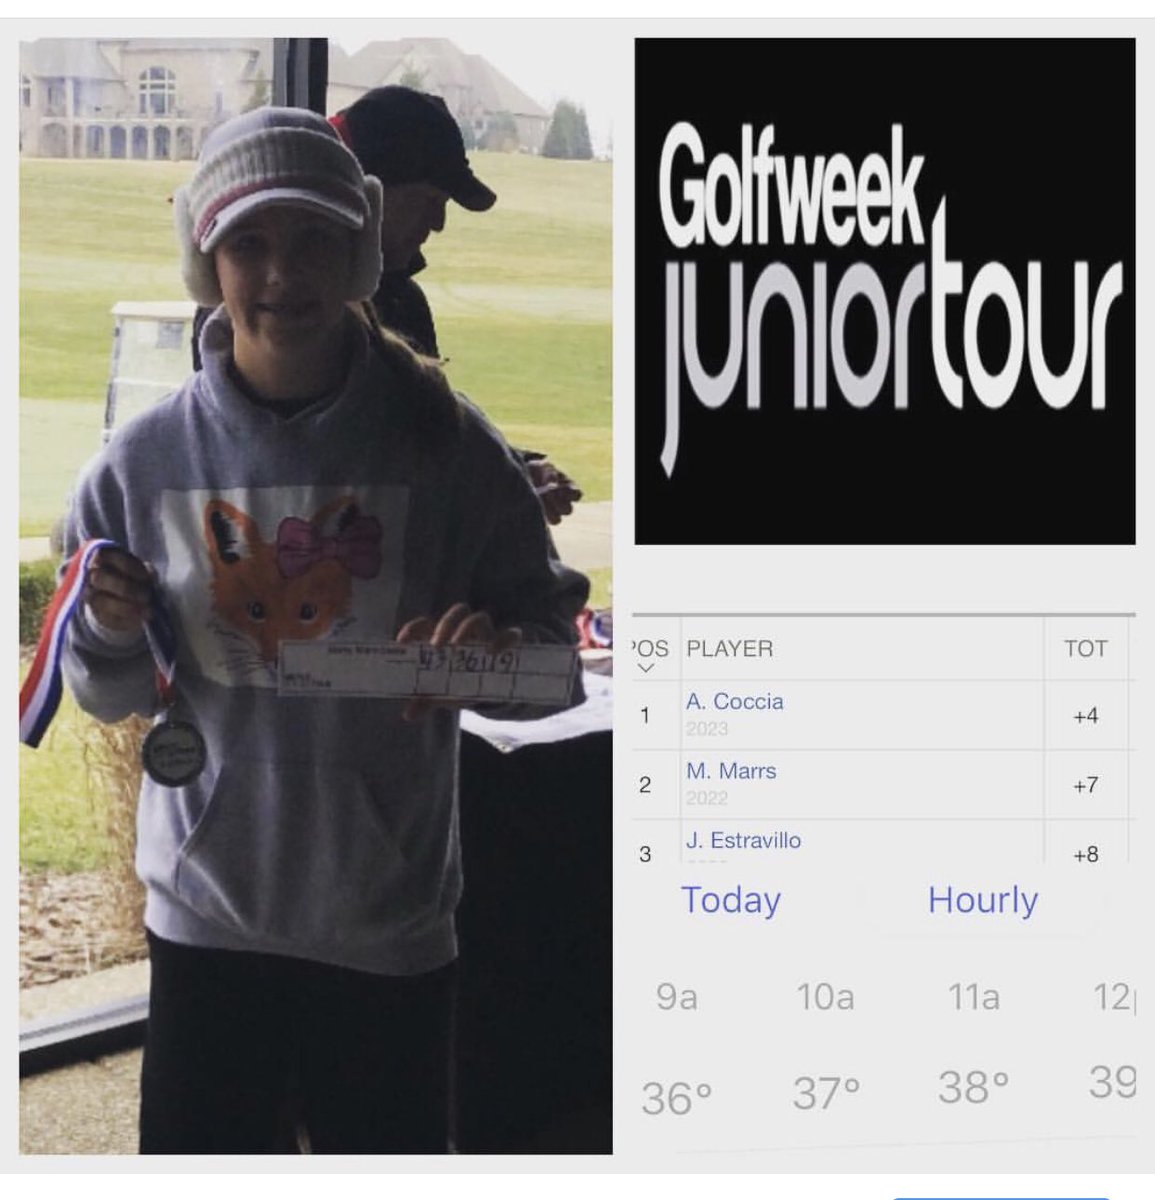 Cold start to the first tournament of 2019...shot even par 36 on the back to finish with 79 and 2nd place!  #golflife #nodaysoff #golftournament #golfgirls #golflife #girlsthatgolf #juniorgolf #freshmanyear #golfweek #mkthefox